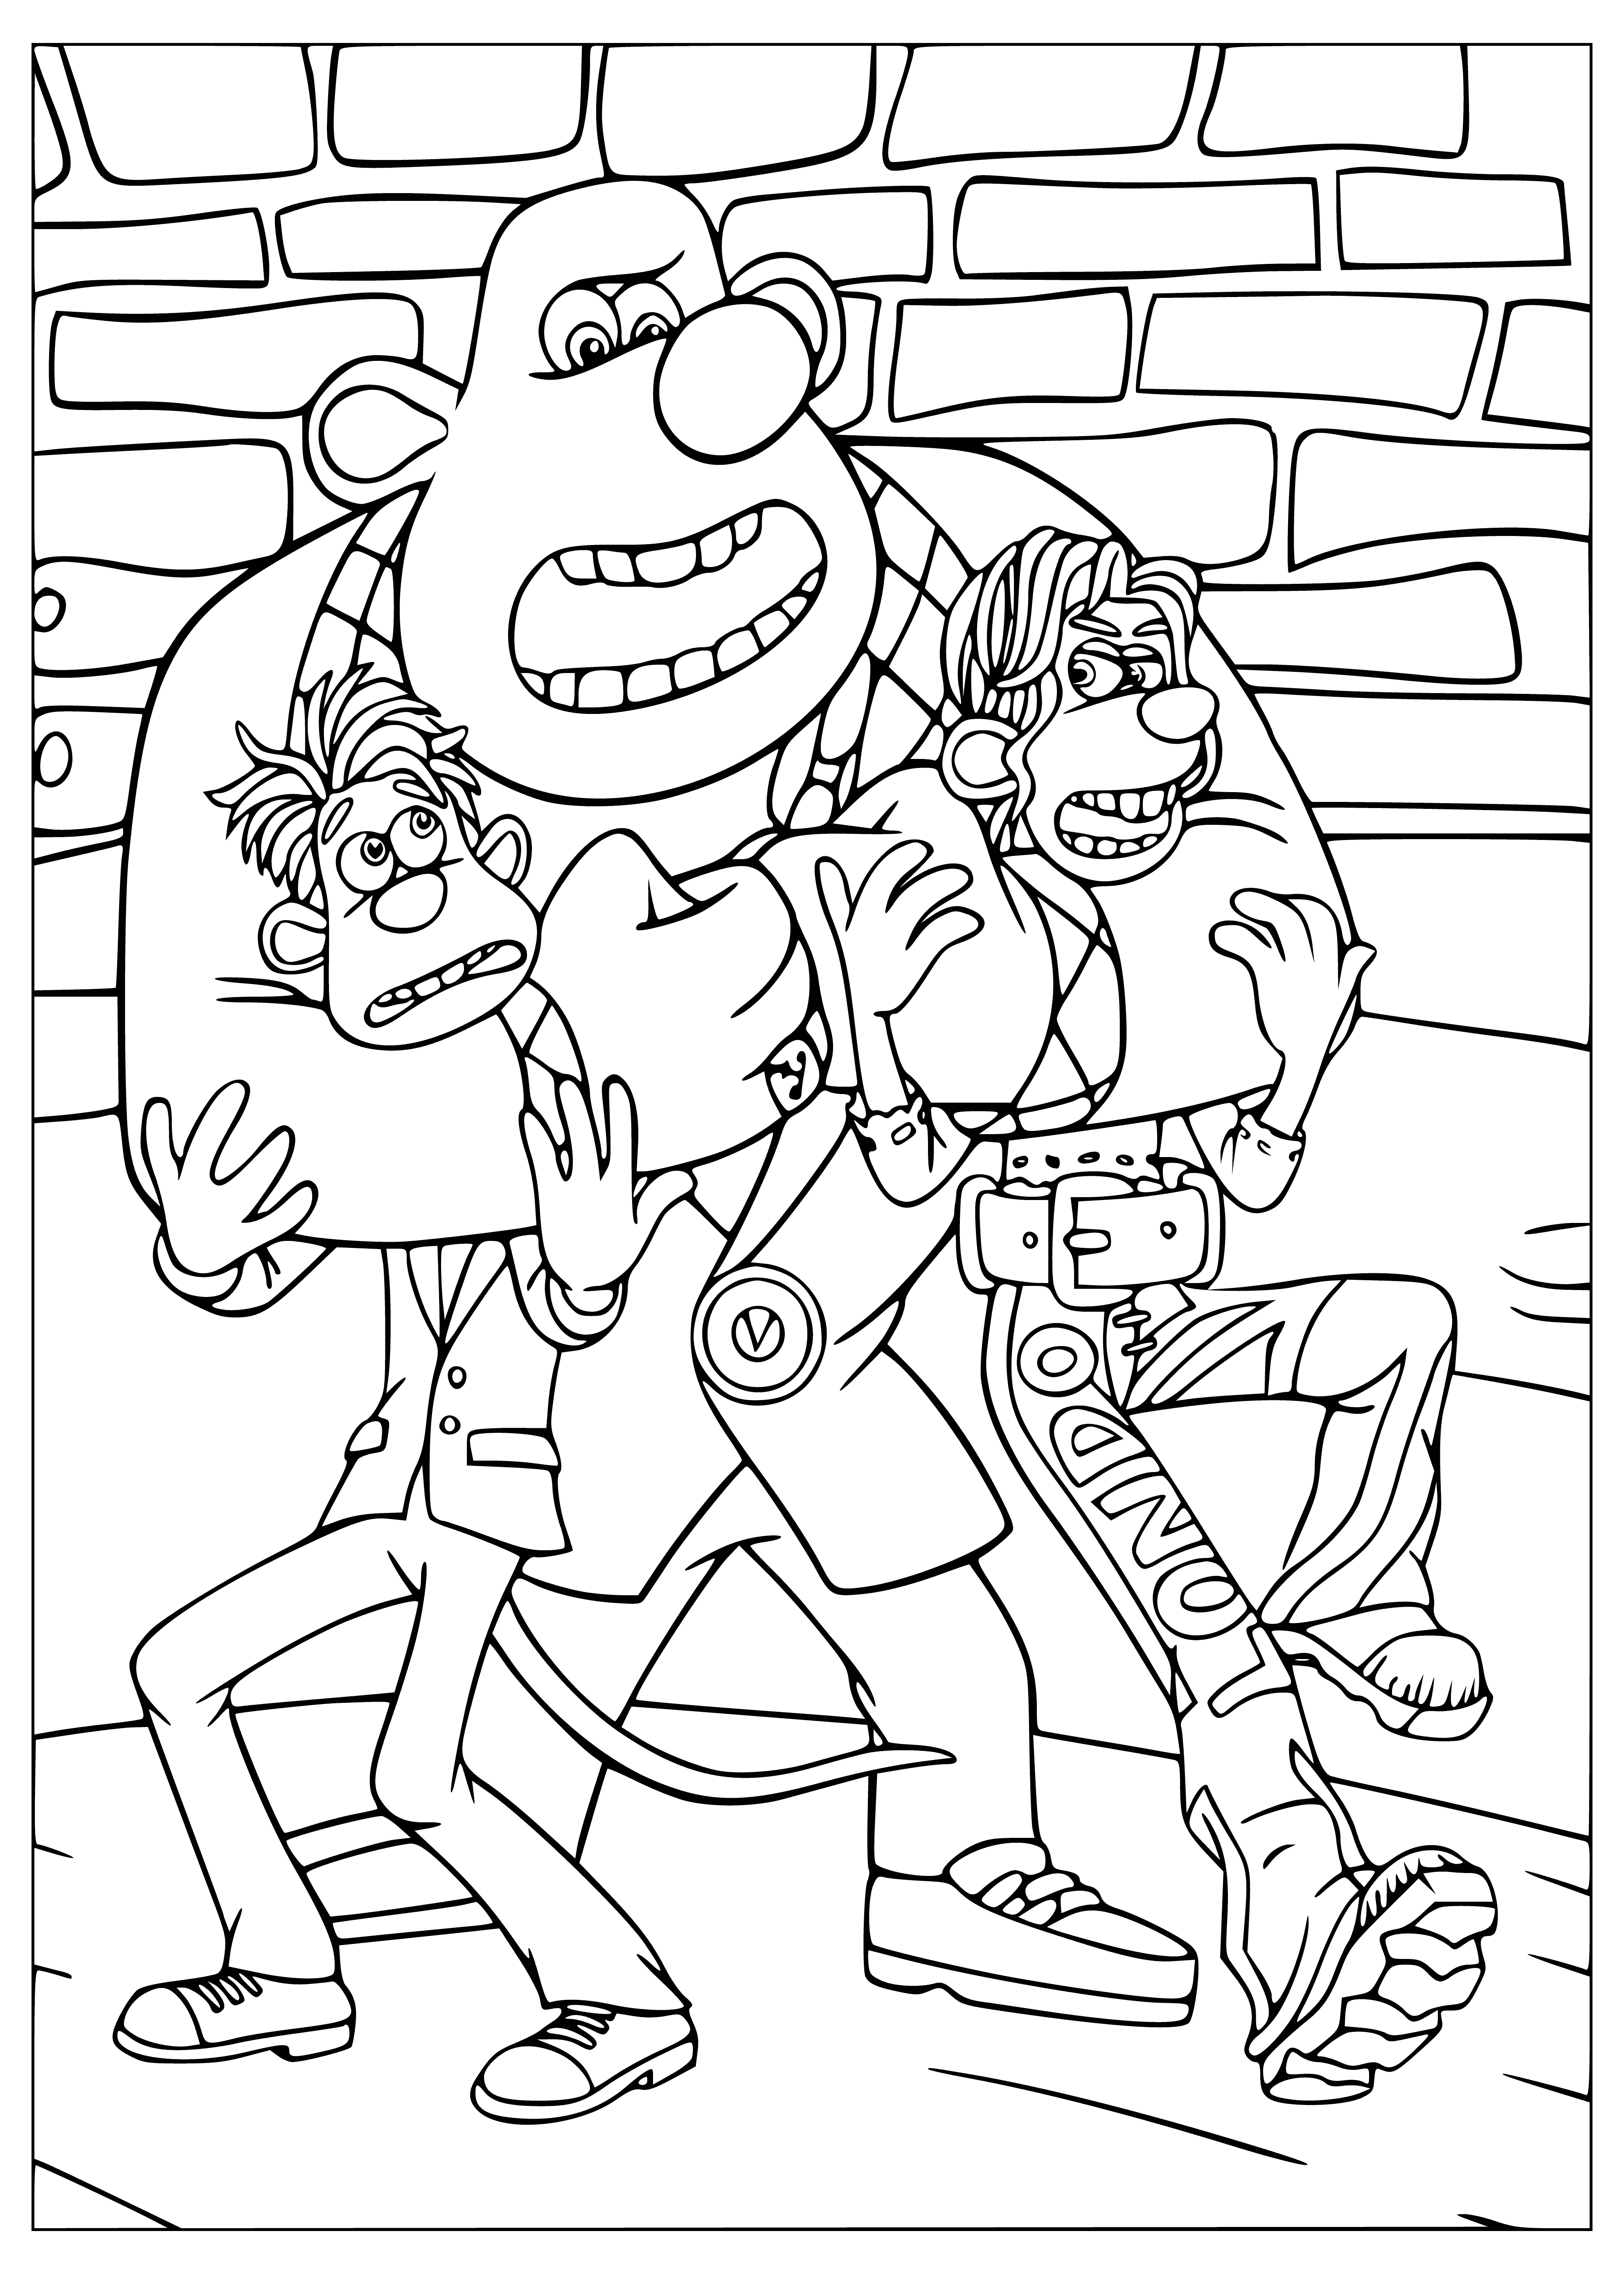 coloring page: Roddy and Rita are held by mean-looking bandits with knives, feared to be in big trouble.